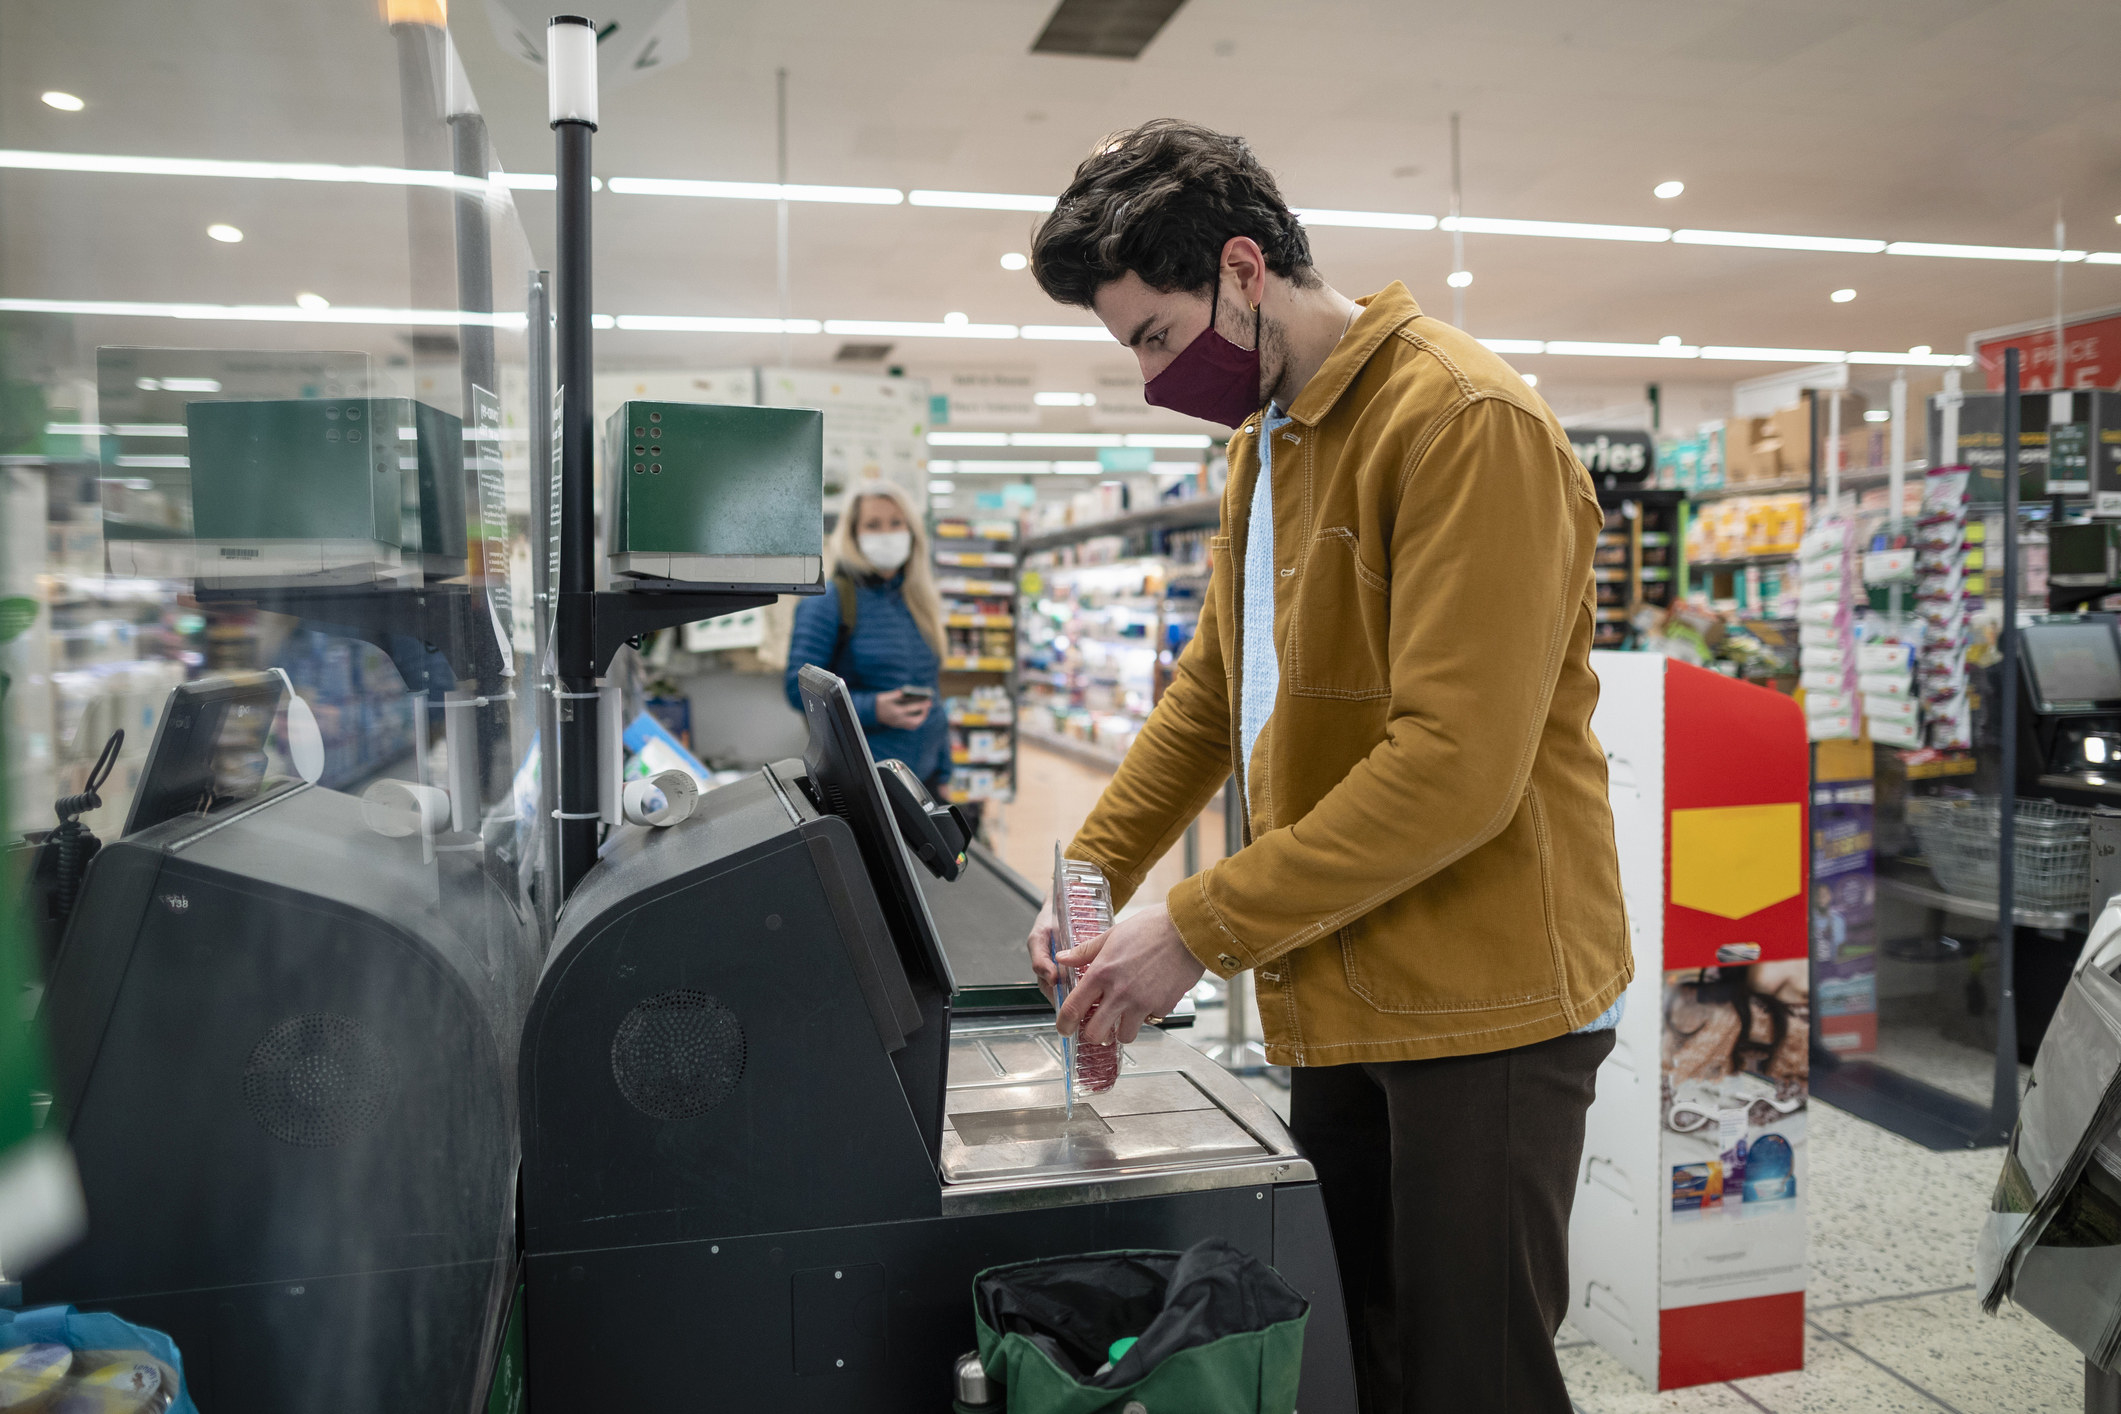 A person scanning an item in the self-checkout line